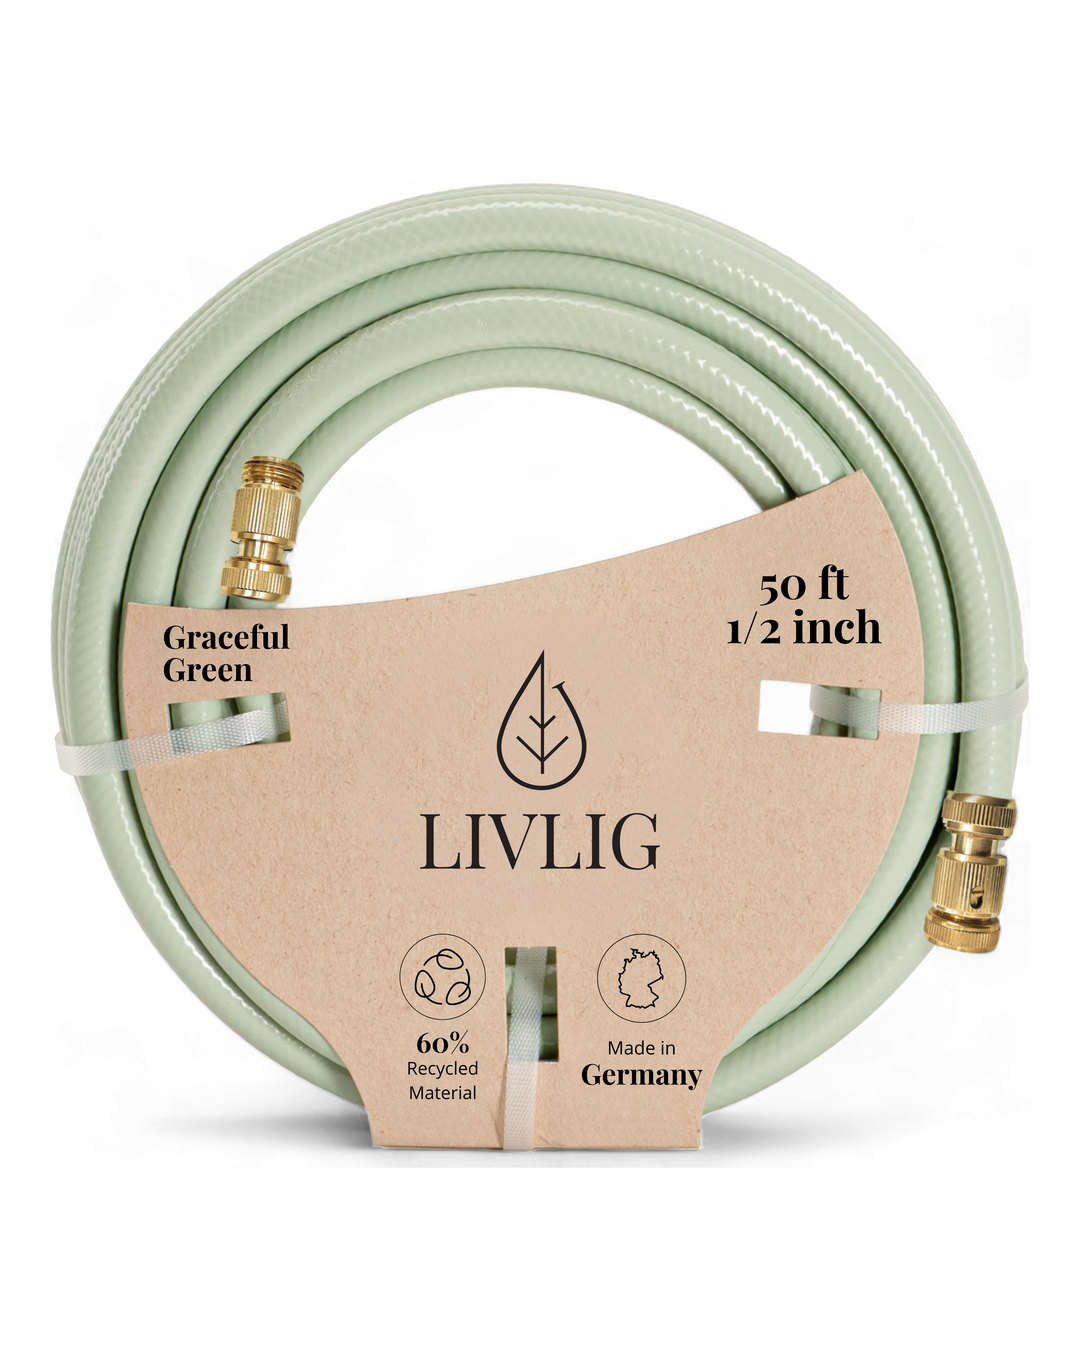 LIVLIG Garden Hose 50ft Graceful Green with Quick Connect Fittings